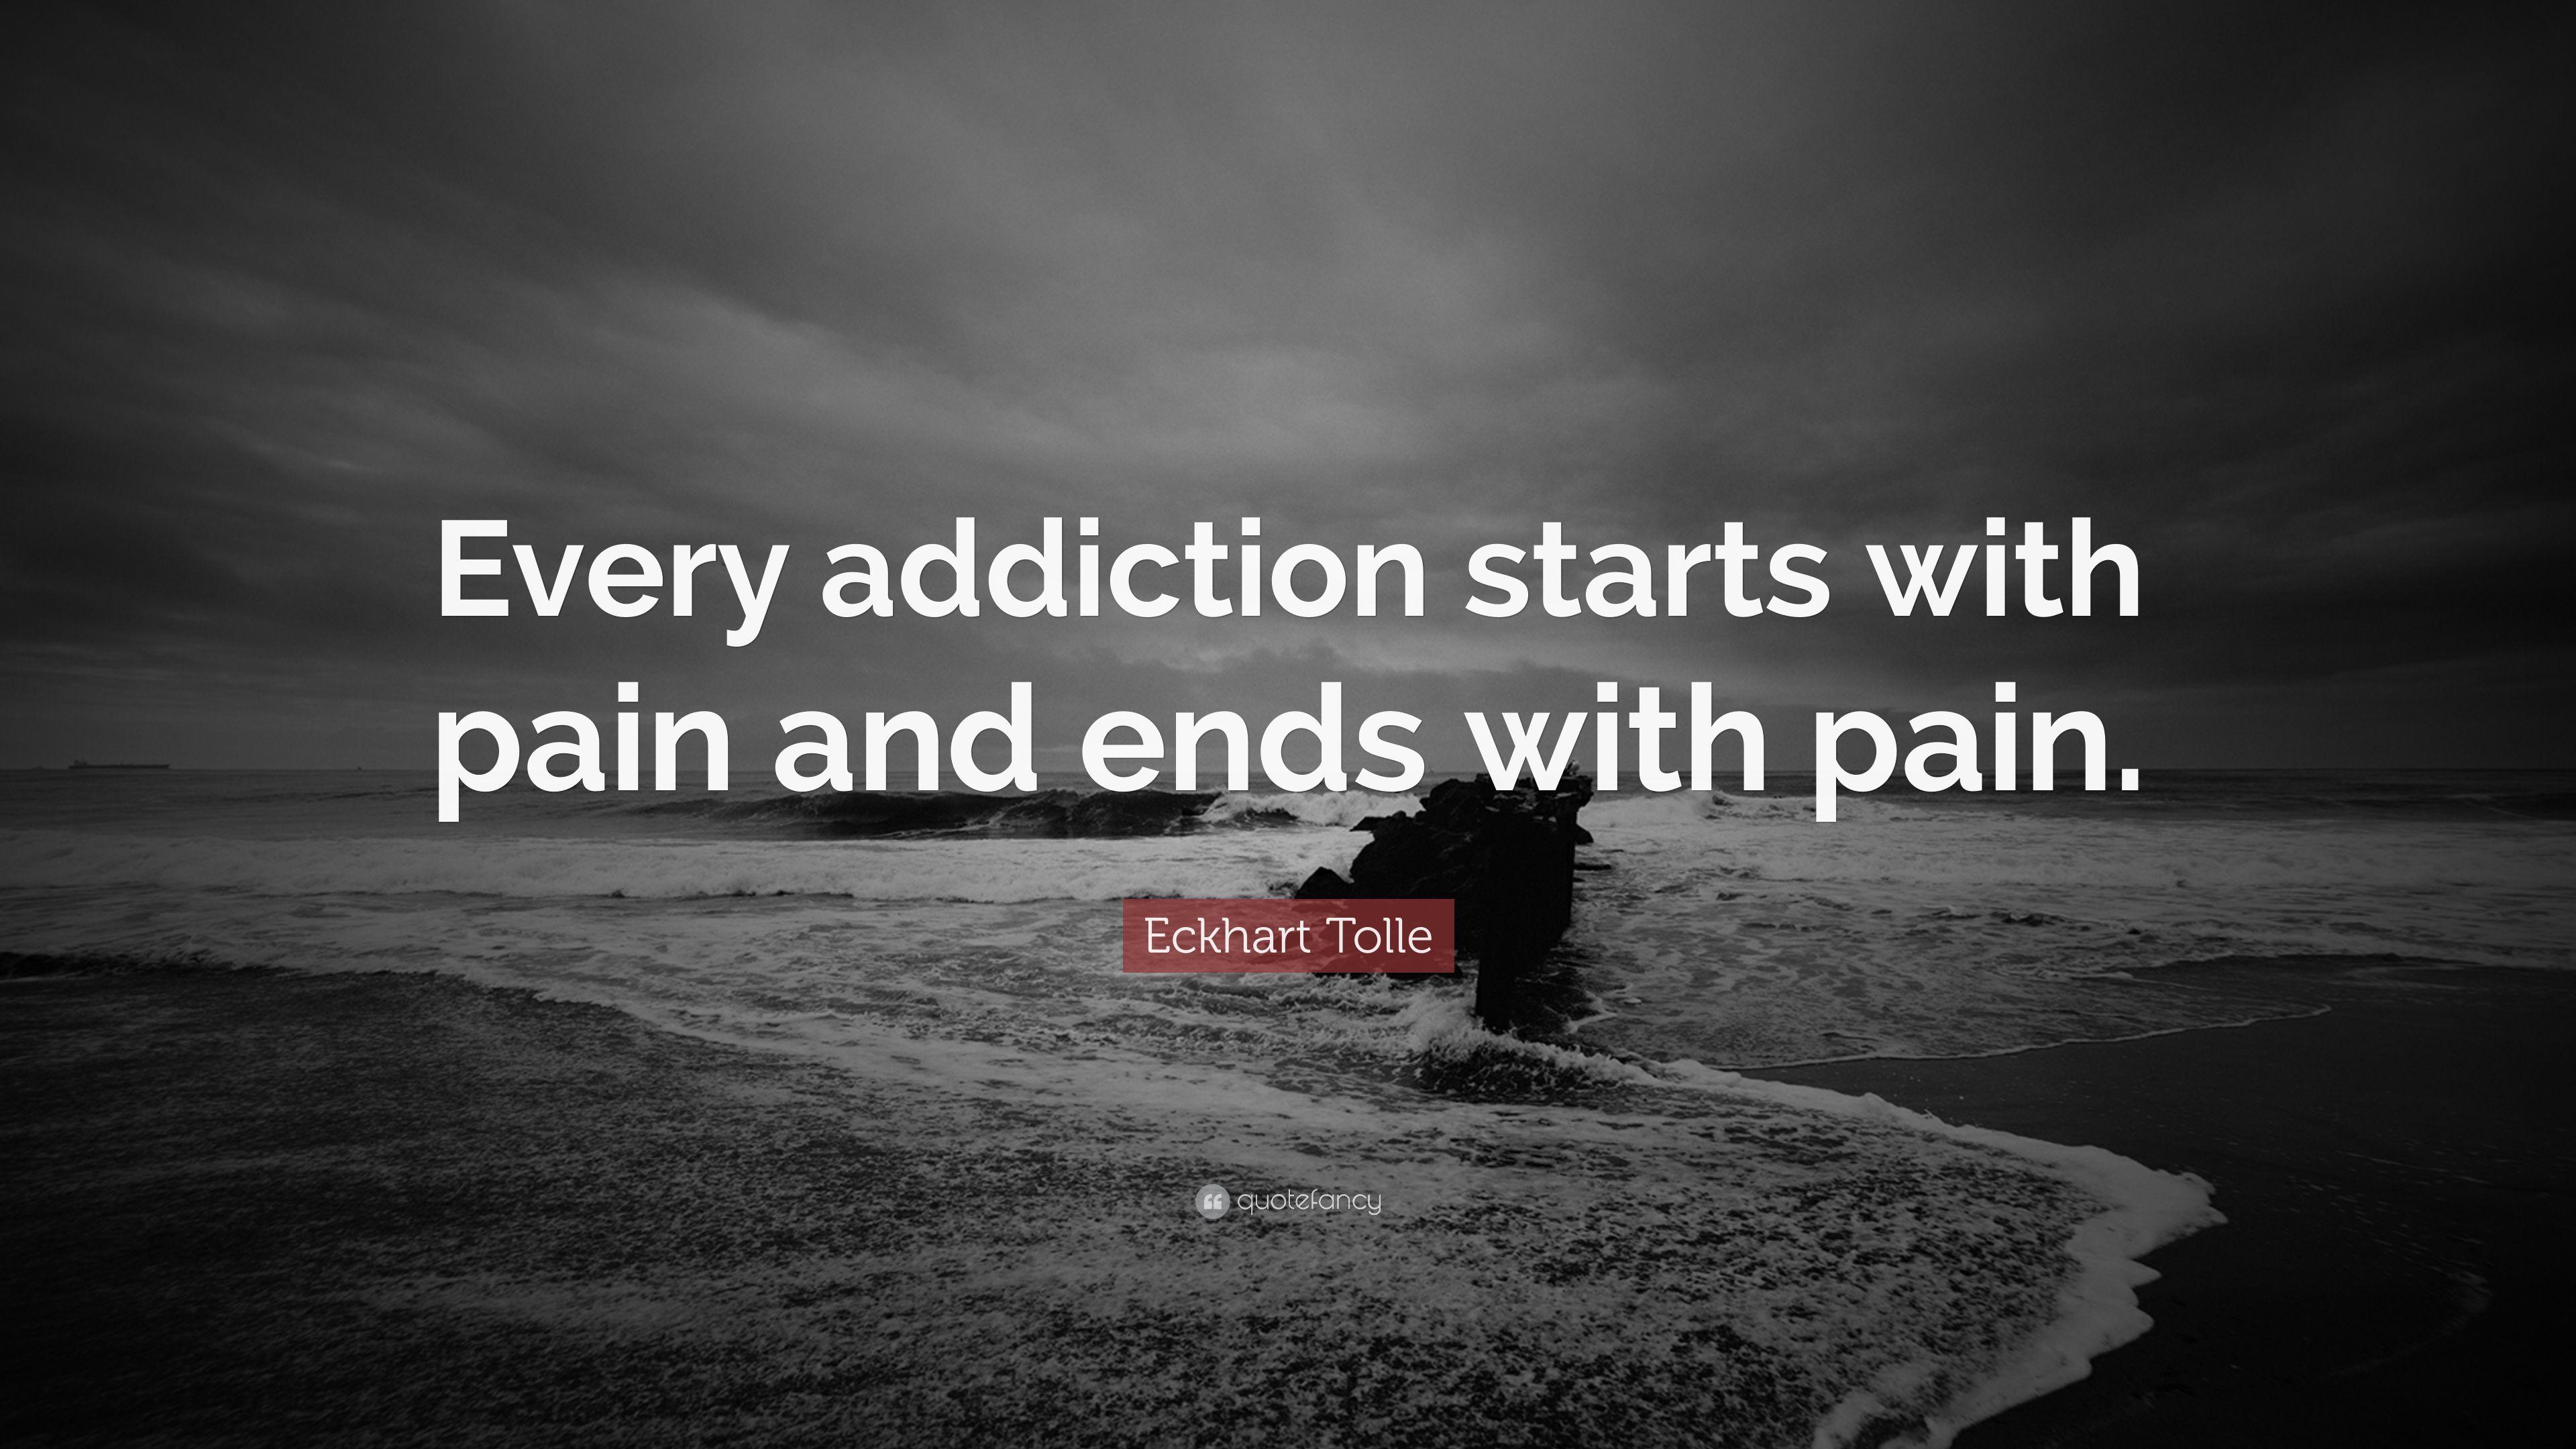 Eckhart Tolle Quote: “Every addiction starts with pain and ends